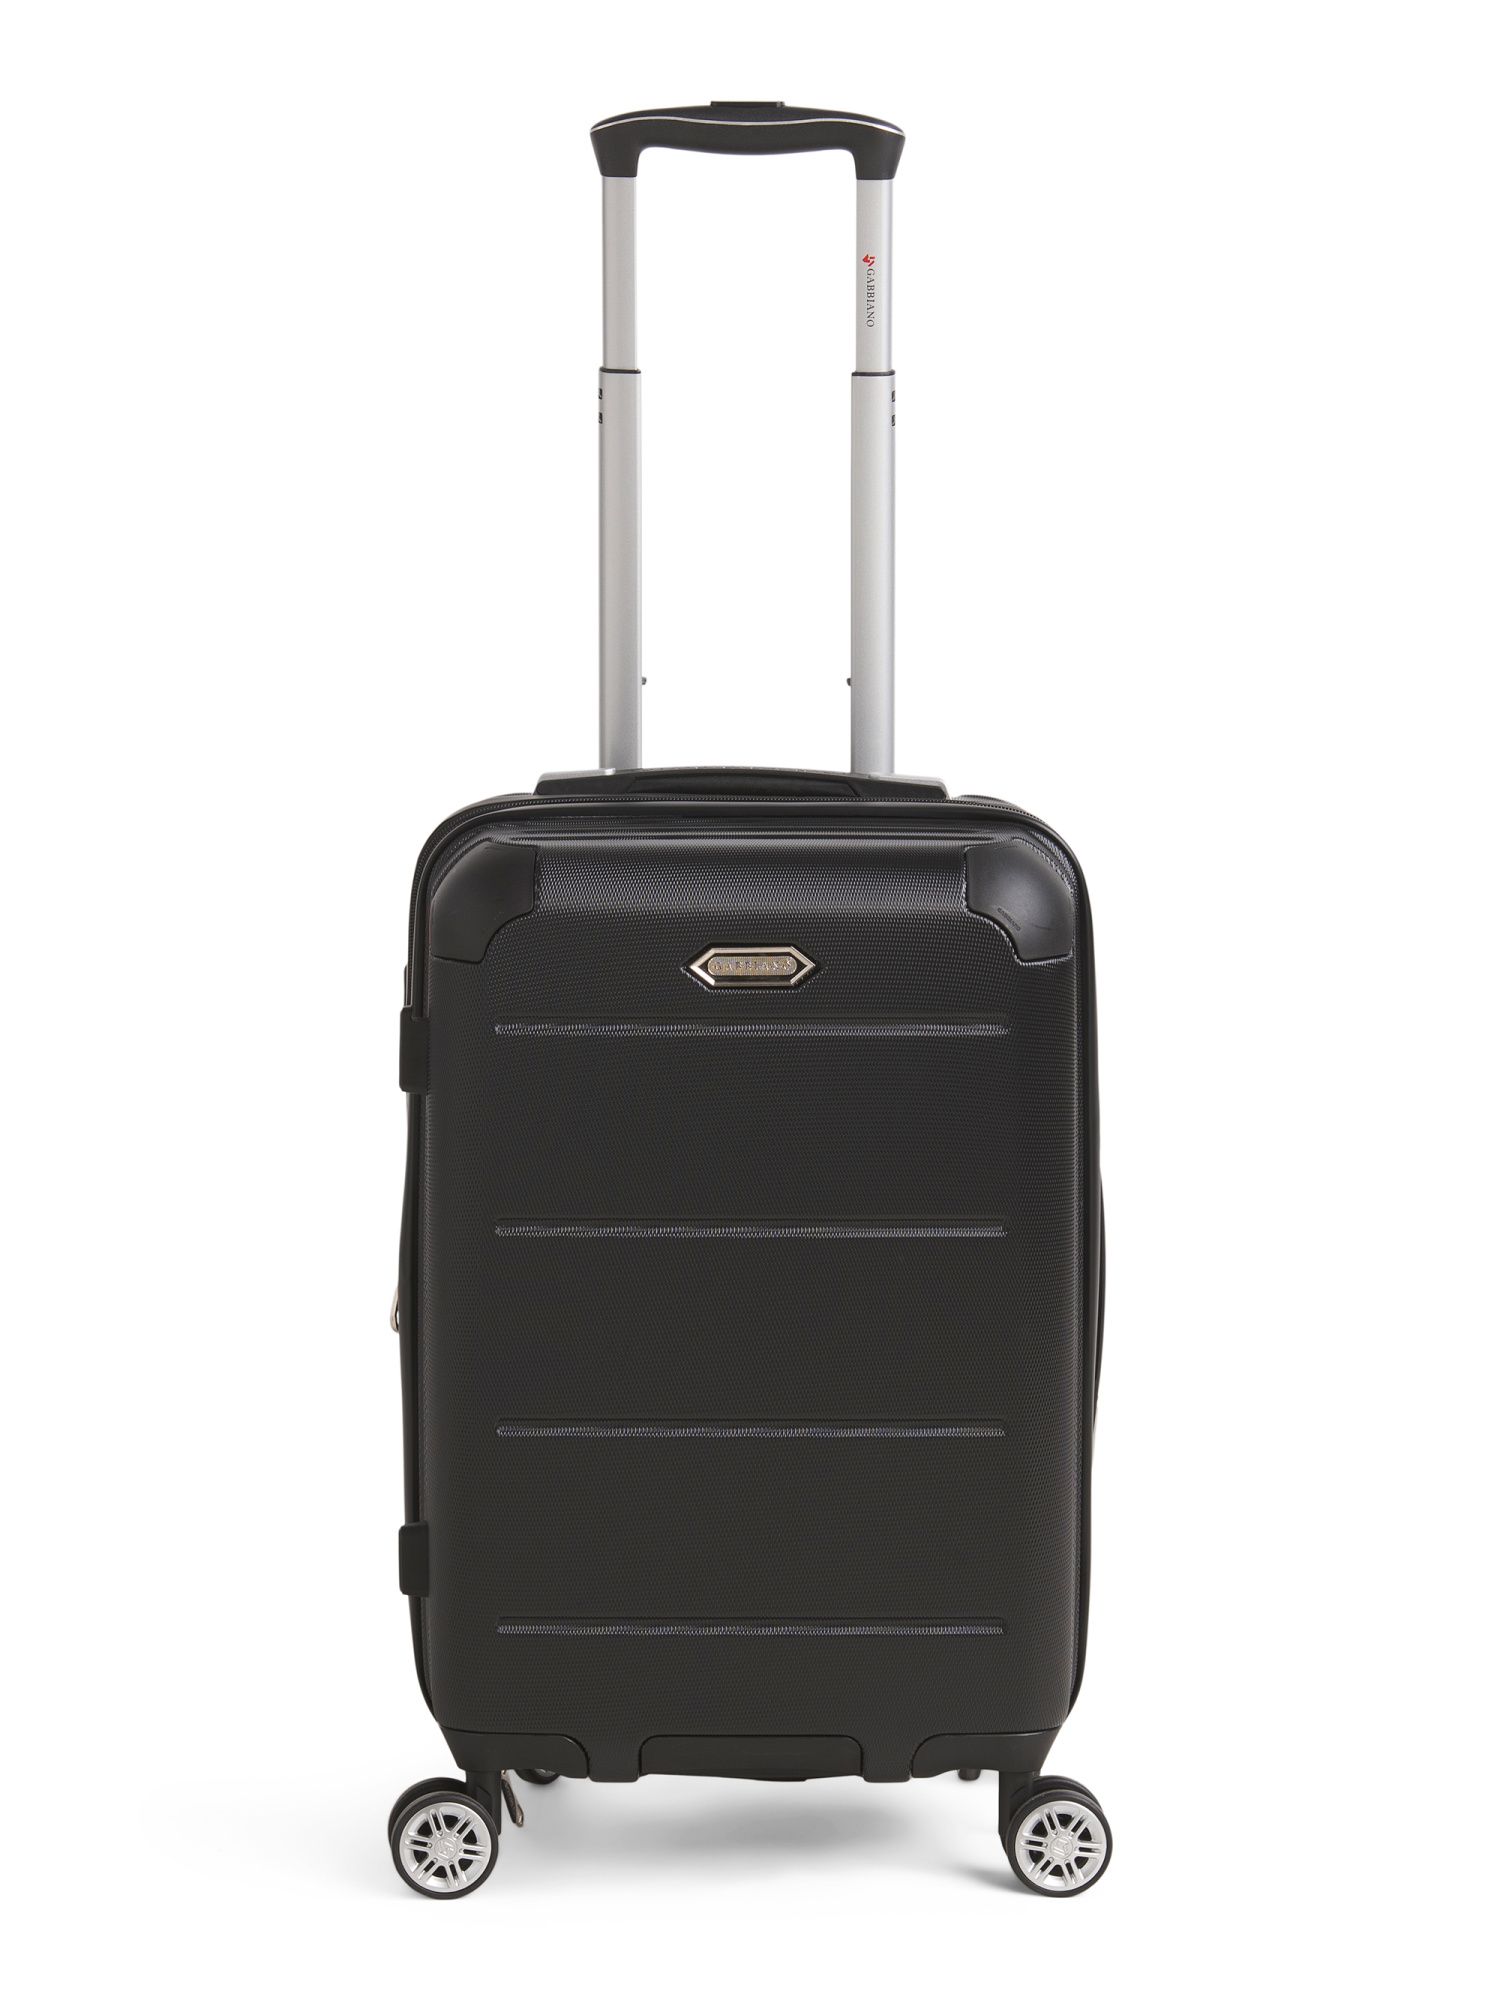 20in Infinity Hardside Carry-on Spinner | TJ Maxx